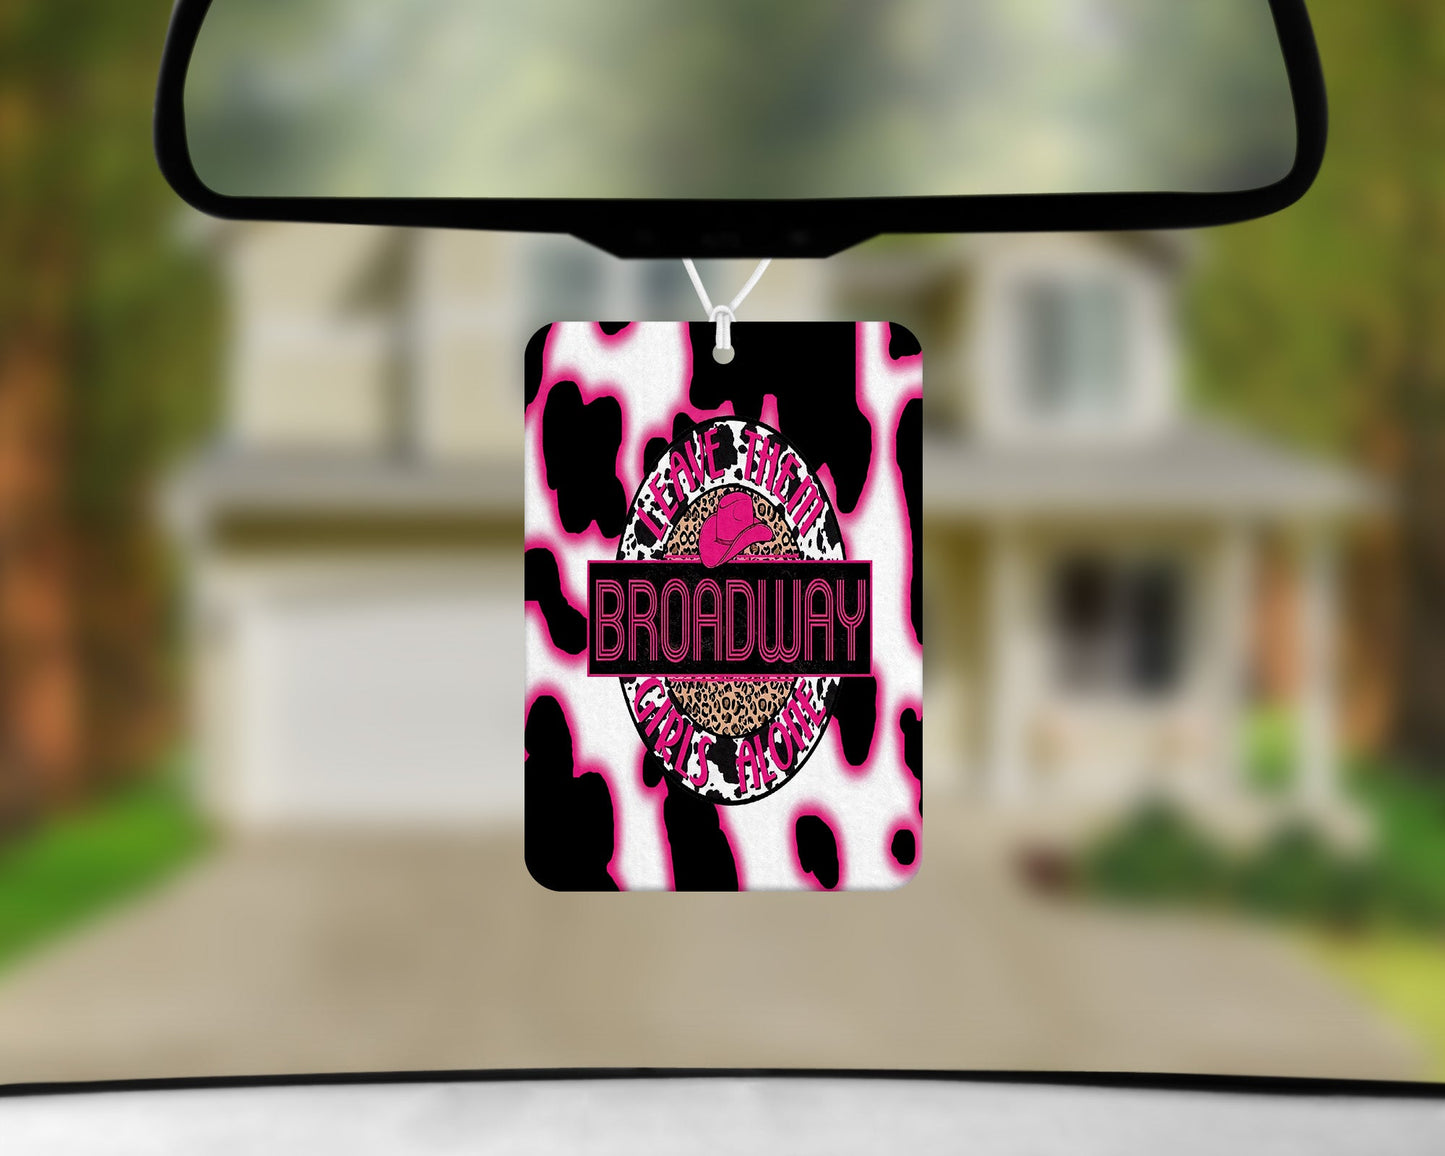 Leave Them Broadway Girls Alone|Freshie|Includes Scent Bottle - Vehicle Air Freshener